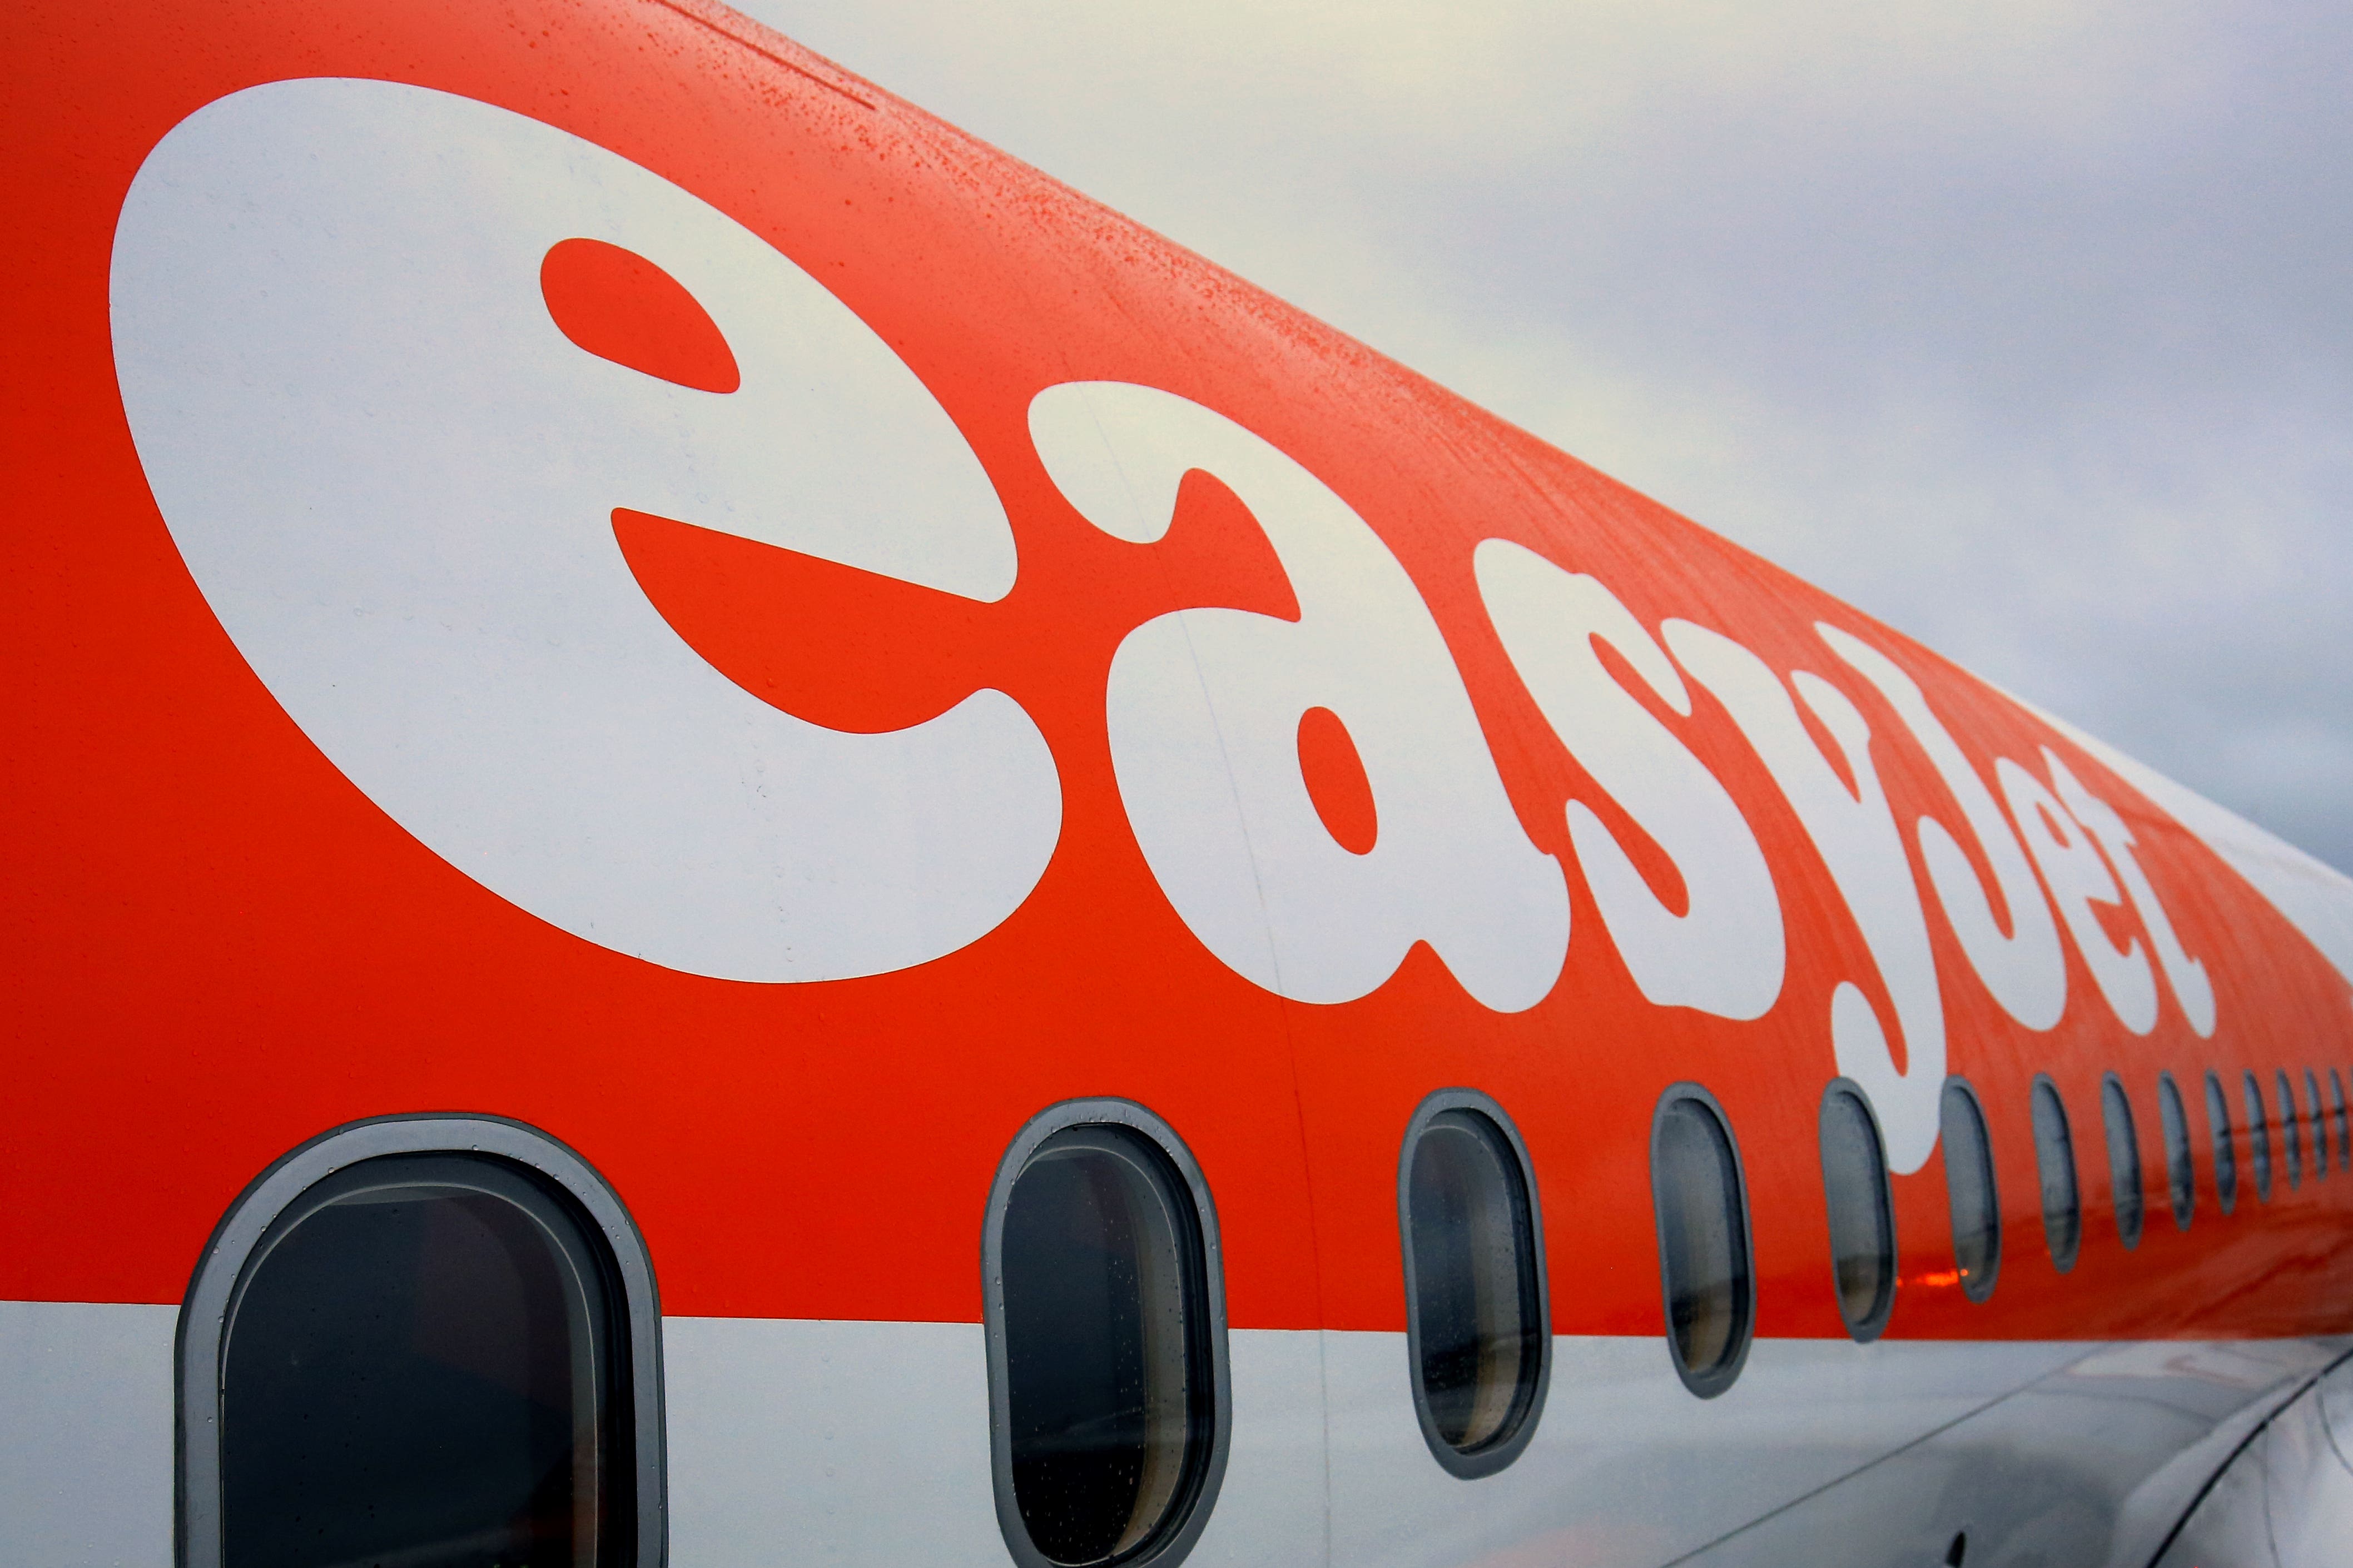 EasyJet plans to operate its full schedule during Border Force strikes, the Luton-based airline has announced (Gareth Fuller/PA)